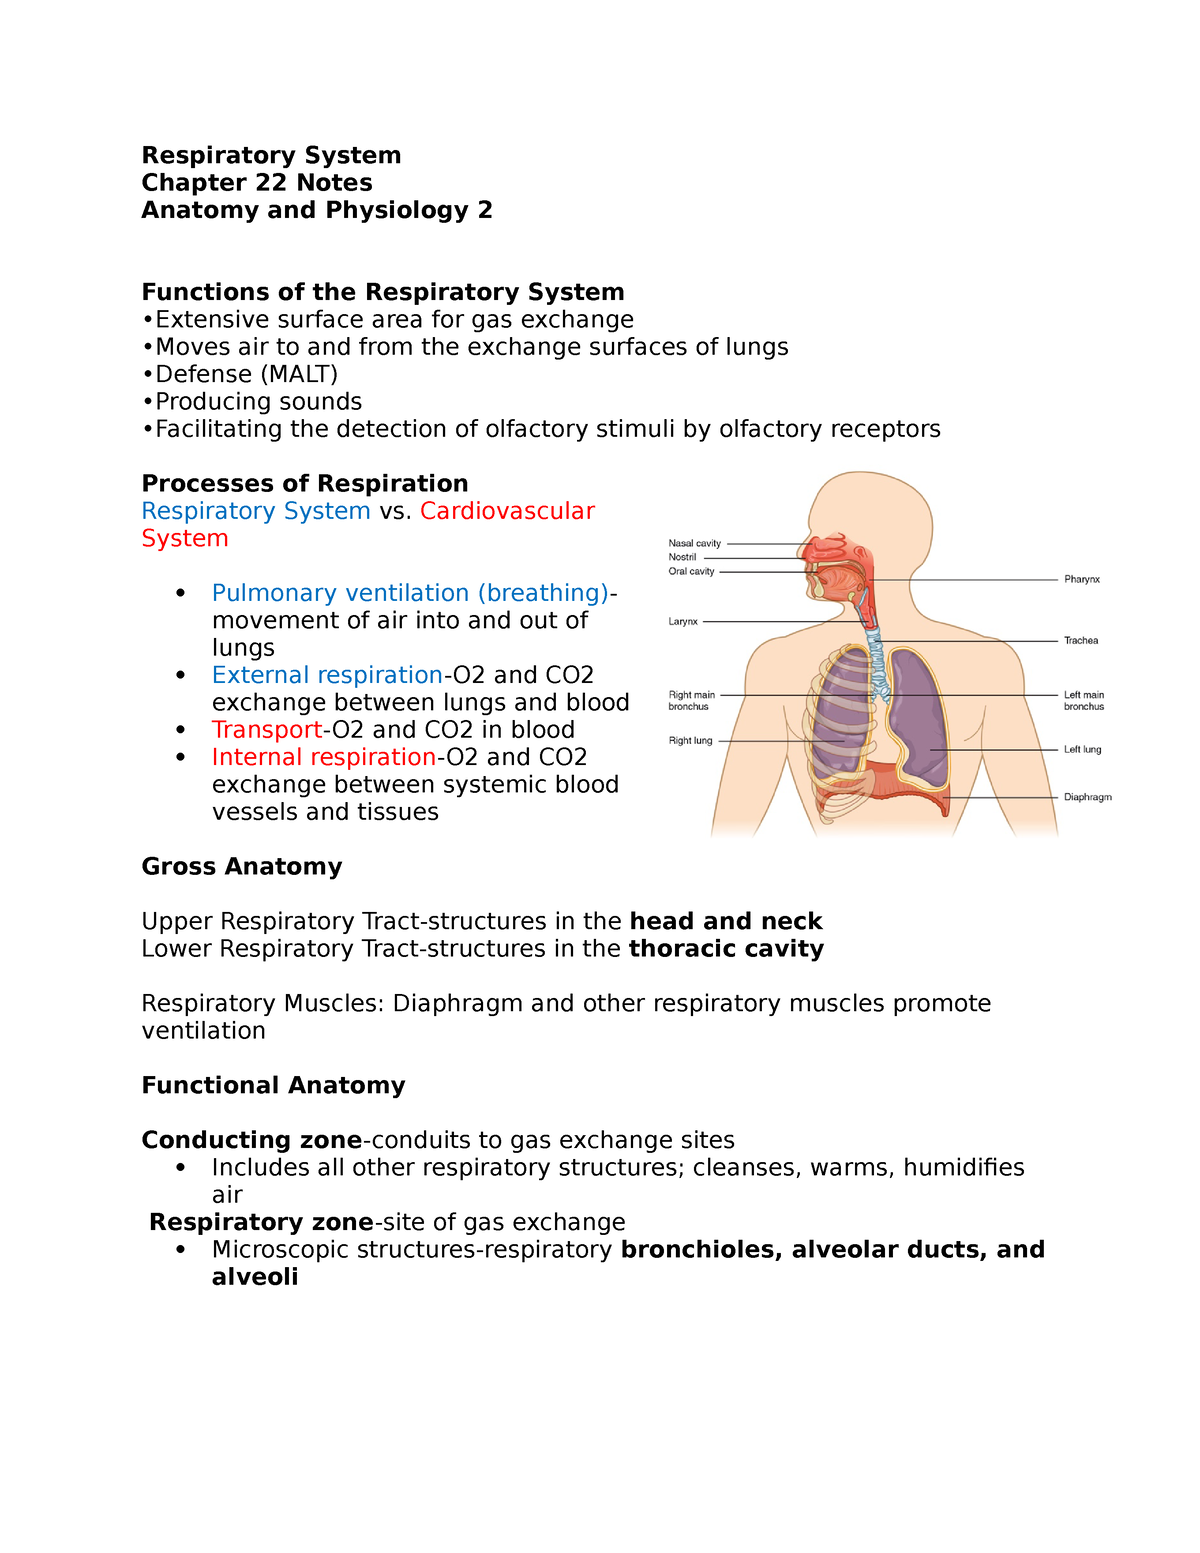 Respiratory System Notes Respiratory System Chapter 22 Notes Anatomy